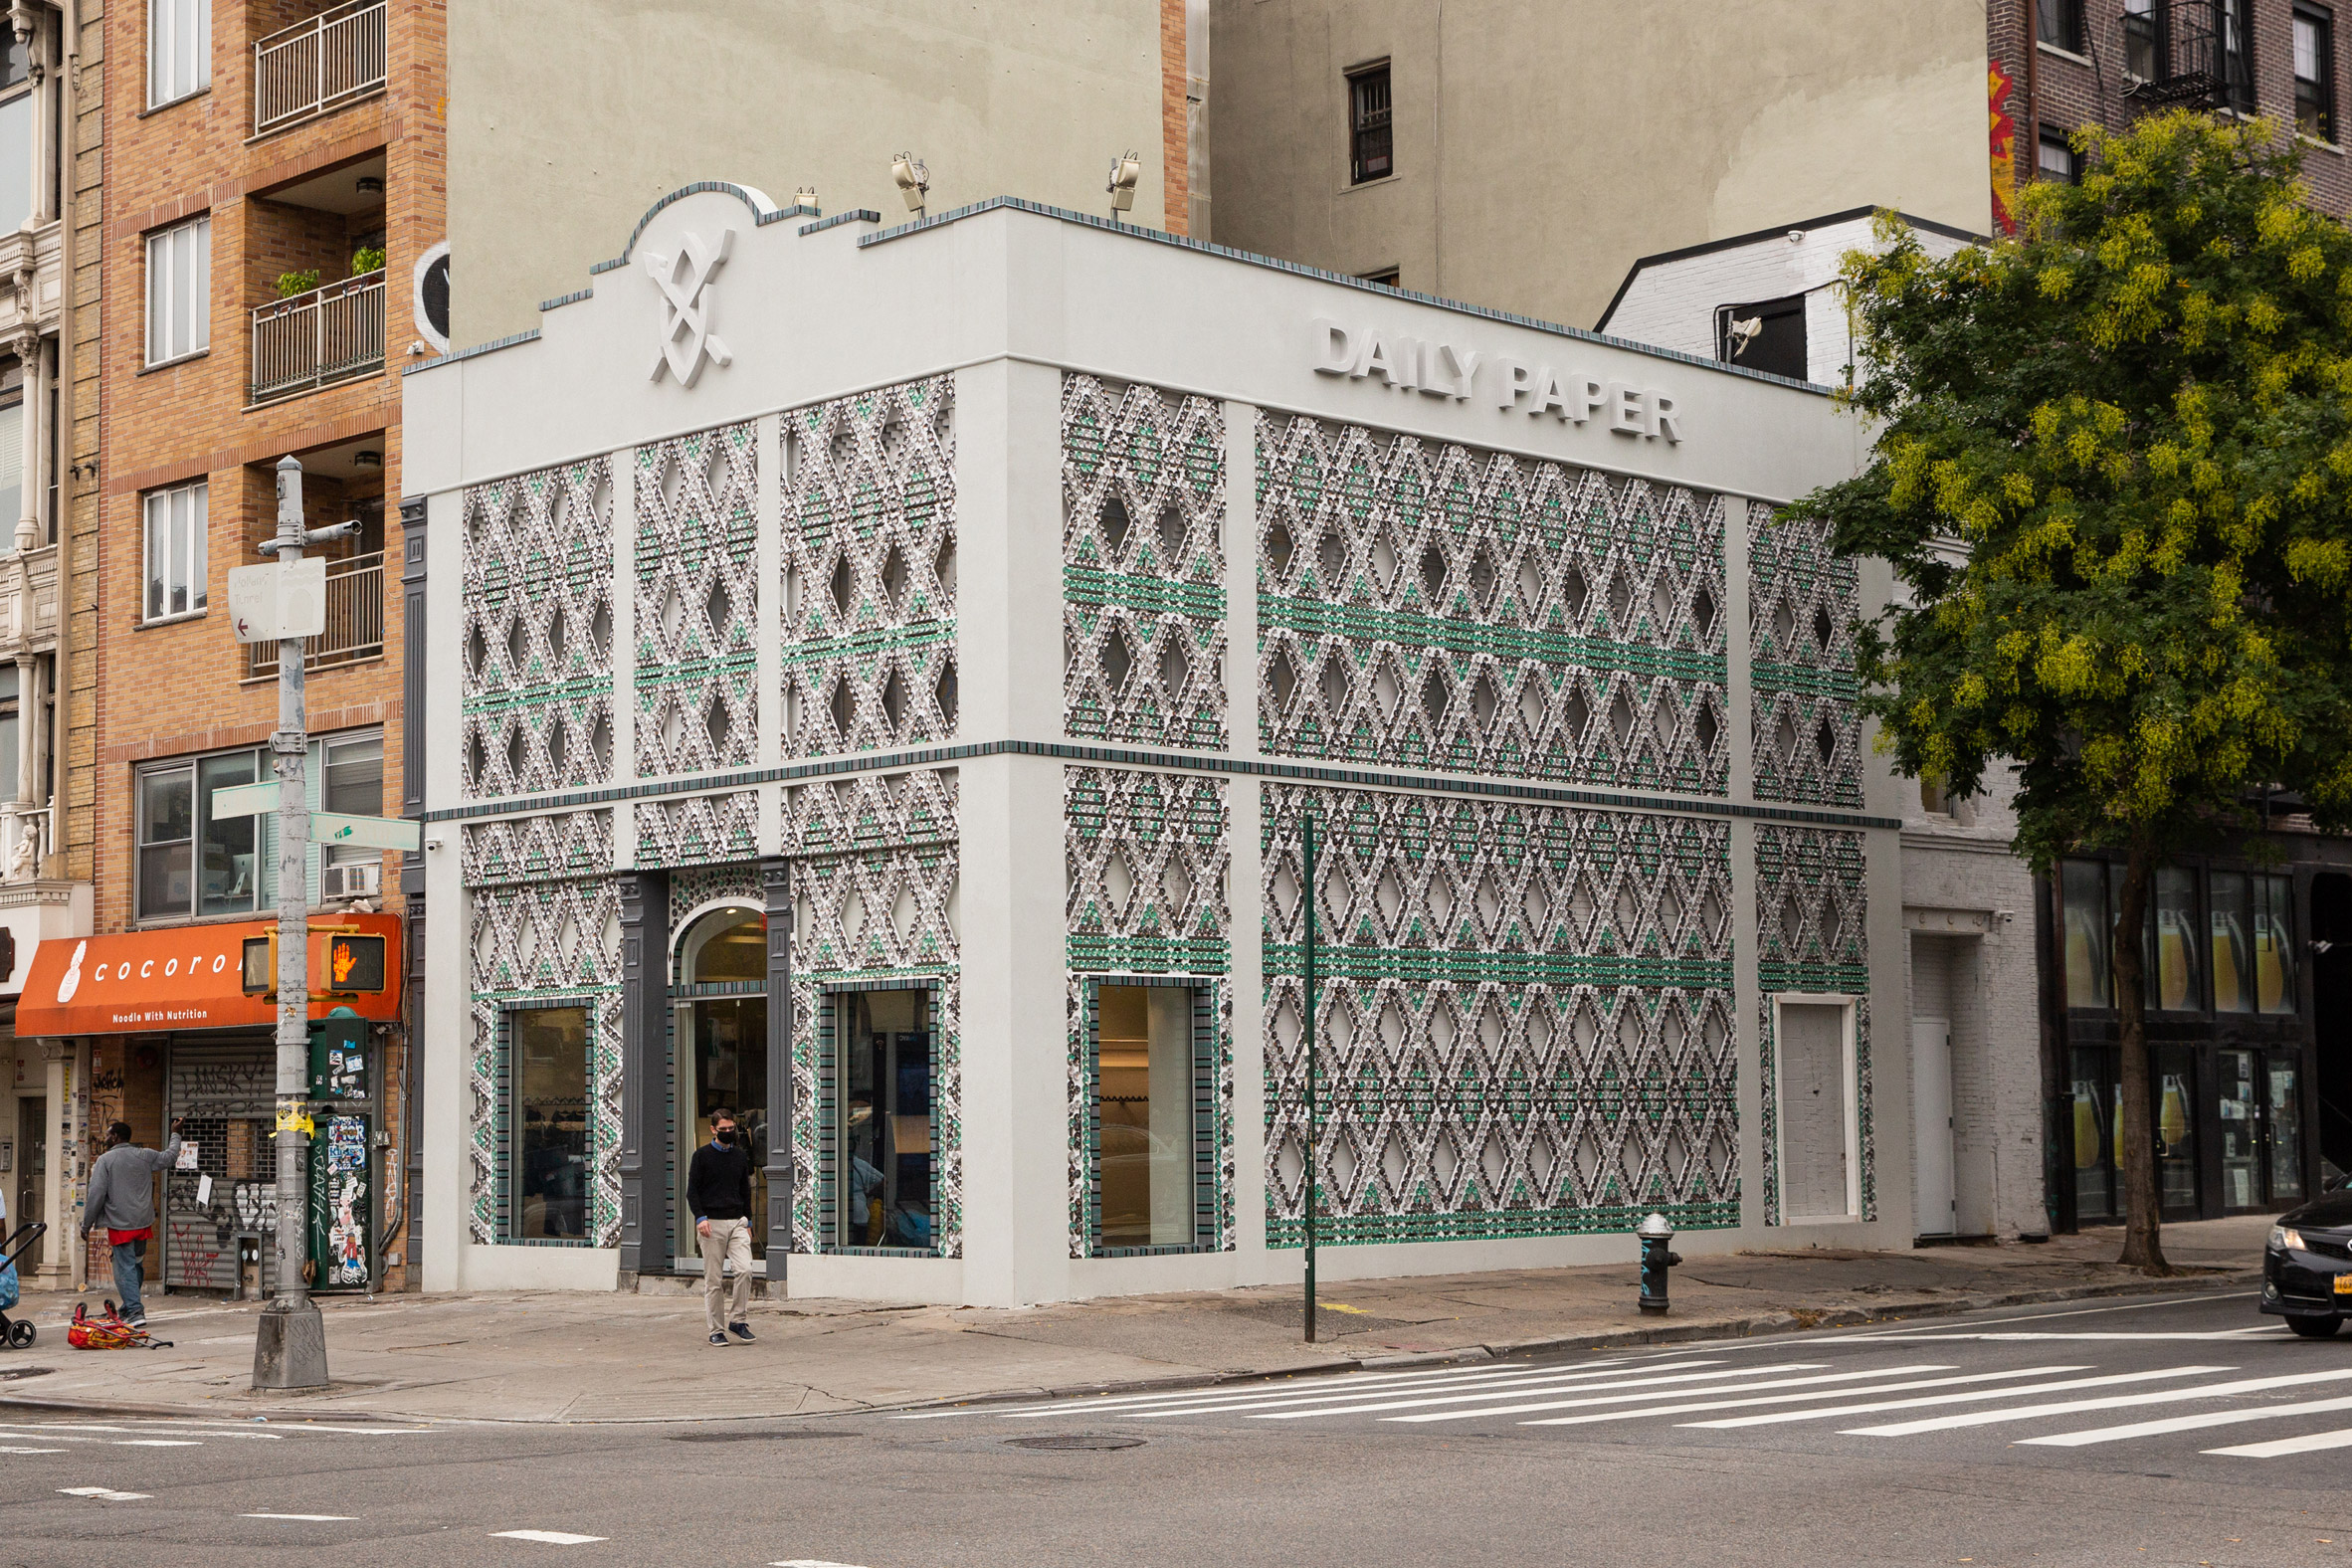 Recycled cans cover Daily Paper store in New York